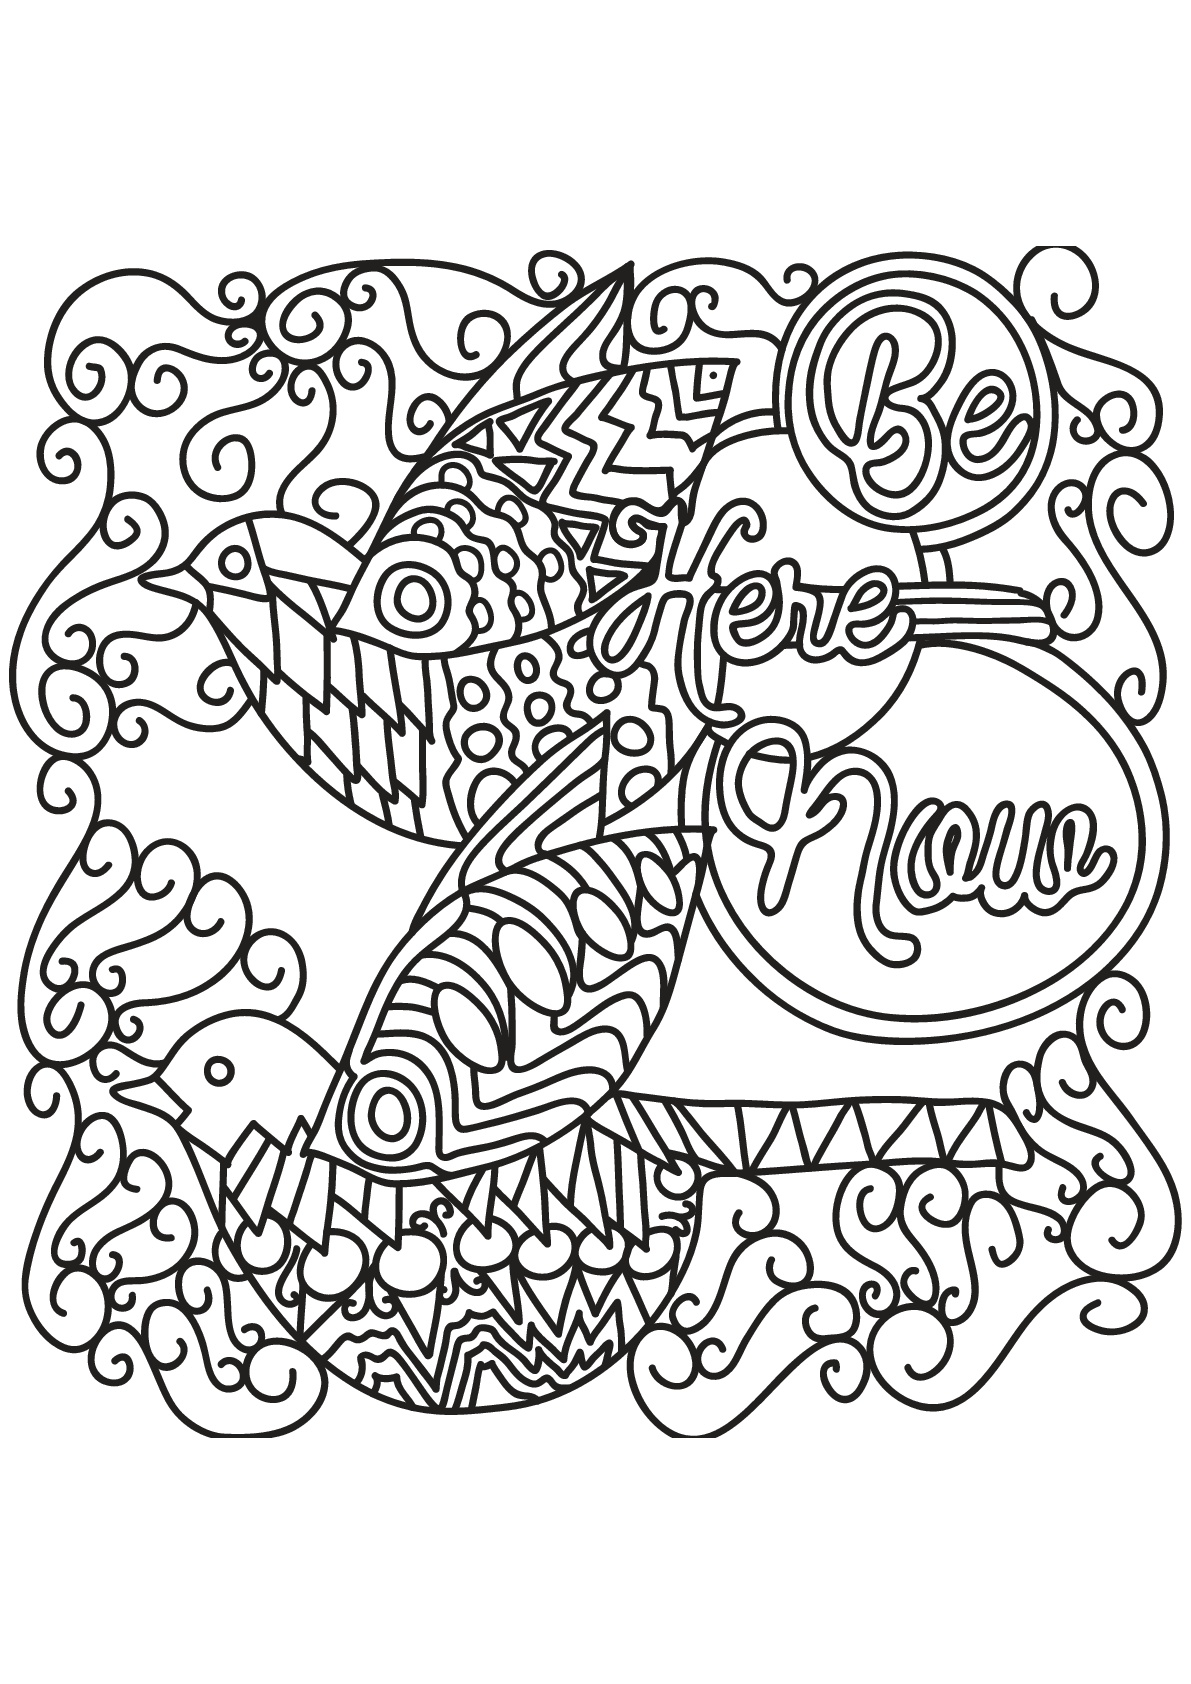 Download Free book quote 16 - Quotes Adult Coloring Pages